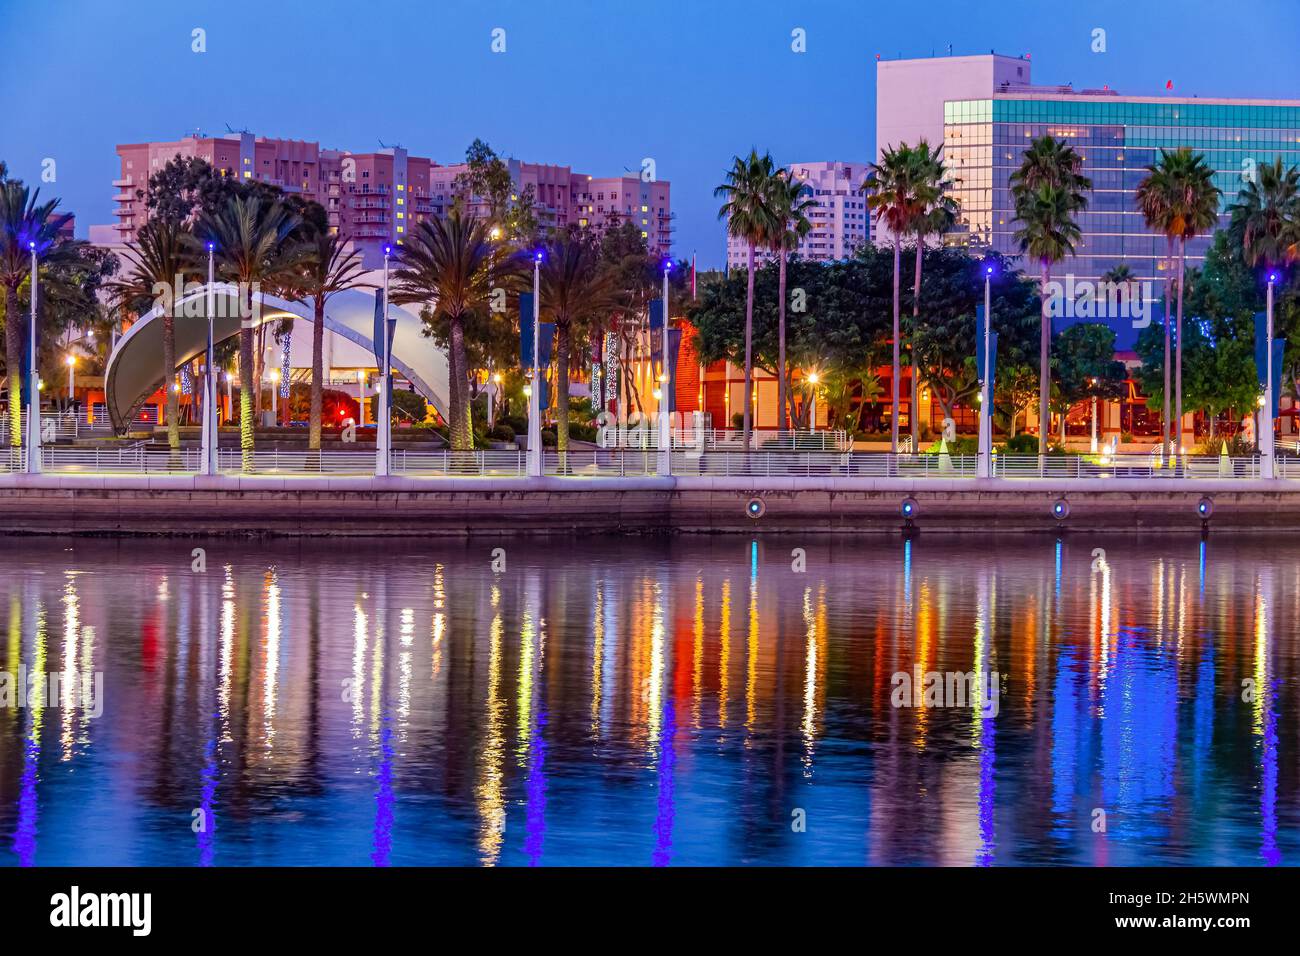 The Long Beach, California skyline is reflected in the still water and the evening light creates a beautiful glow. Stock Photo